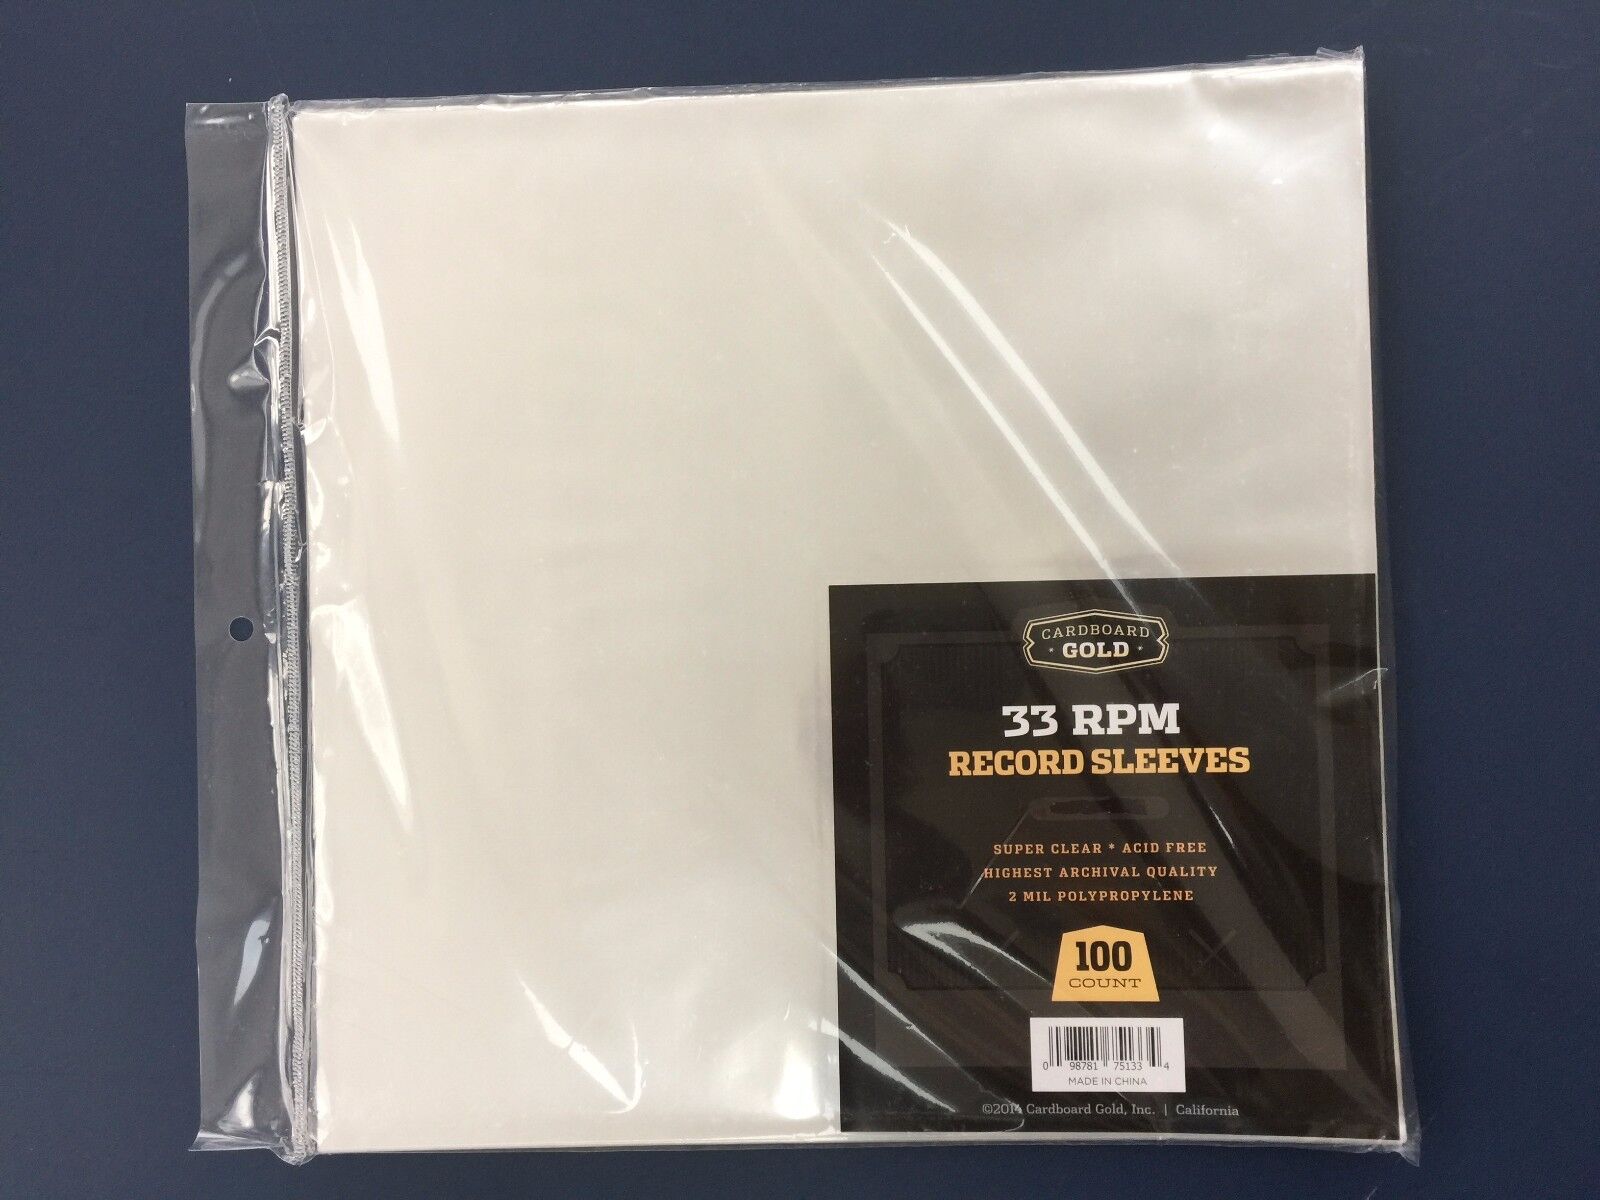 100 Clear Poly Plastic LP Outer Sleeves 2 Mil 12" Vinyl 33rpm Record Album Cover Card Board Gold 33 RPM RECORD SLEEVES - фотография #3